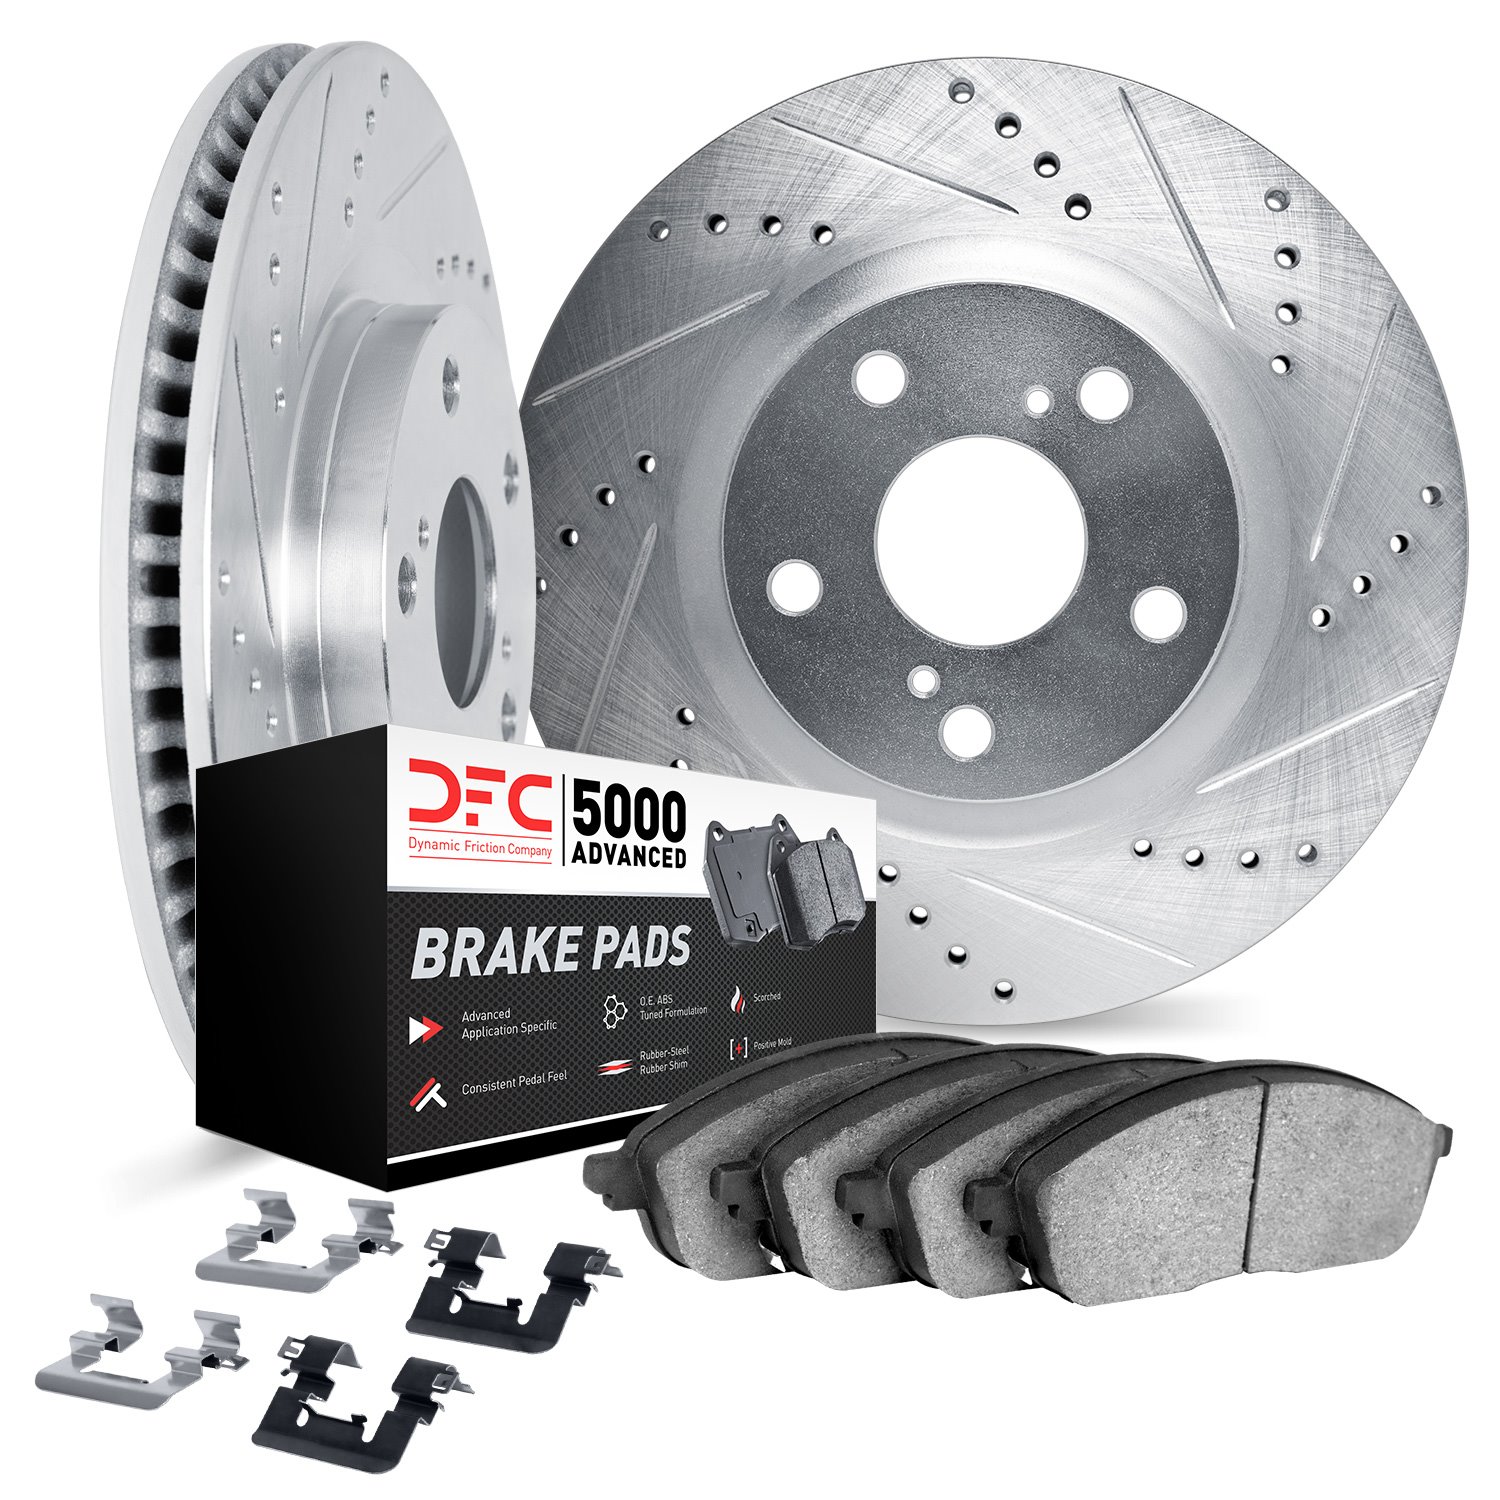 7512-73450 Drilled/Slotted Brake Rotors w/5000 Advanced Brake Pads Kit & Hardware [Silver], Fits Select Audi/Volkswagen, Positio